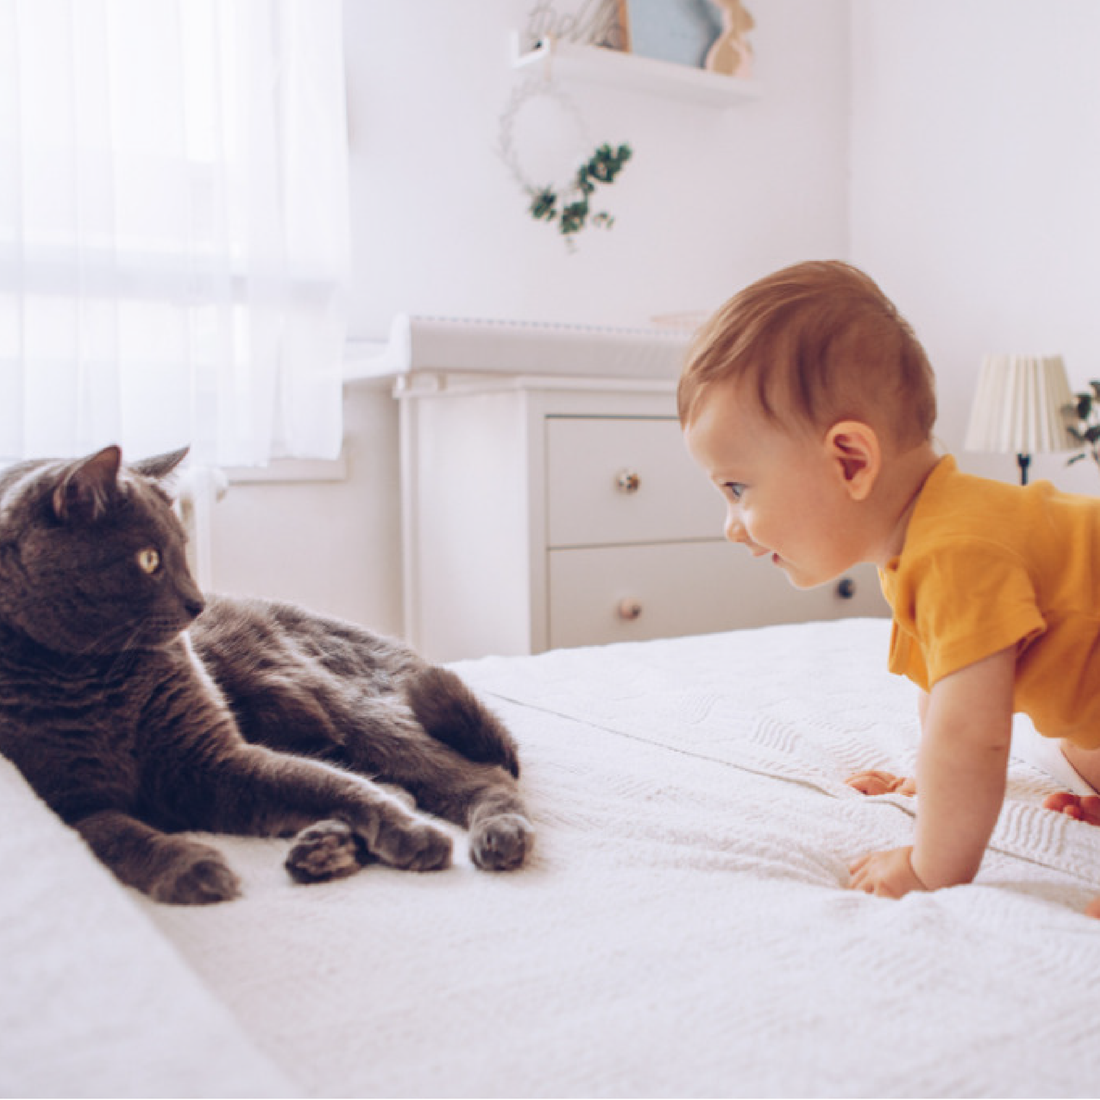 Is Having a Cat with a Newborn Baby a Good Idea?